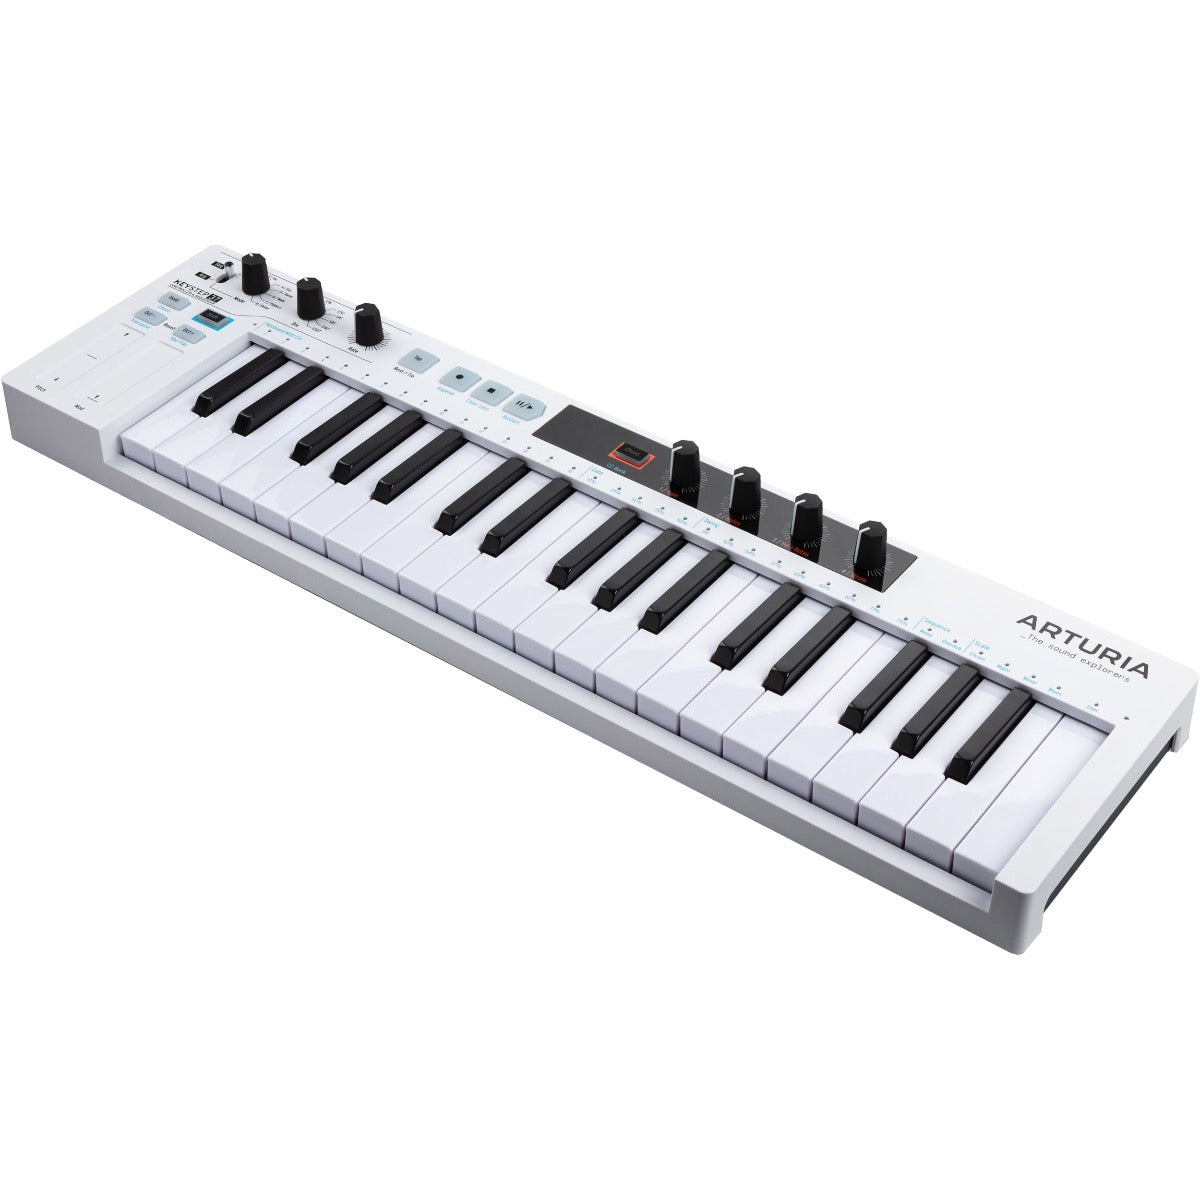 Arturia KeyStep 37 Controller and Sequencer COMPLETE CABLE KIT